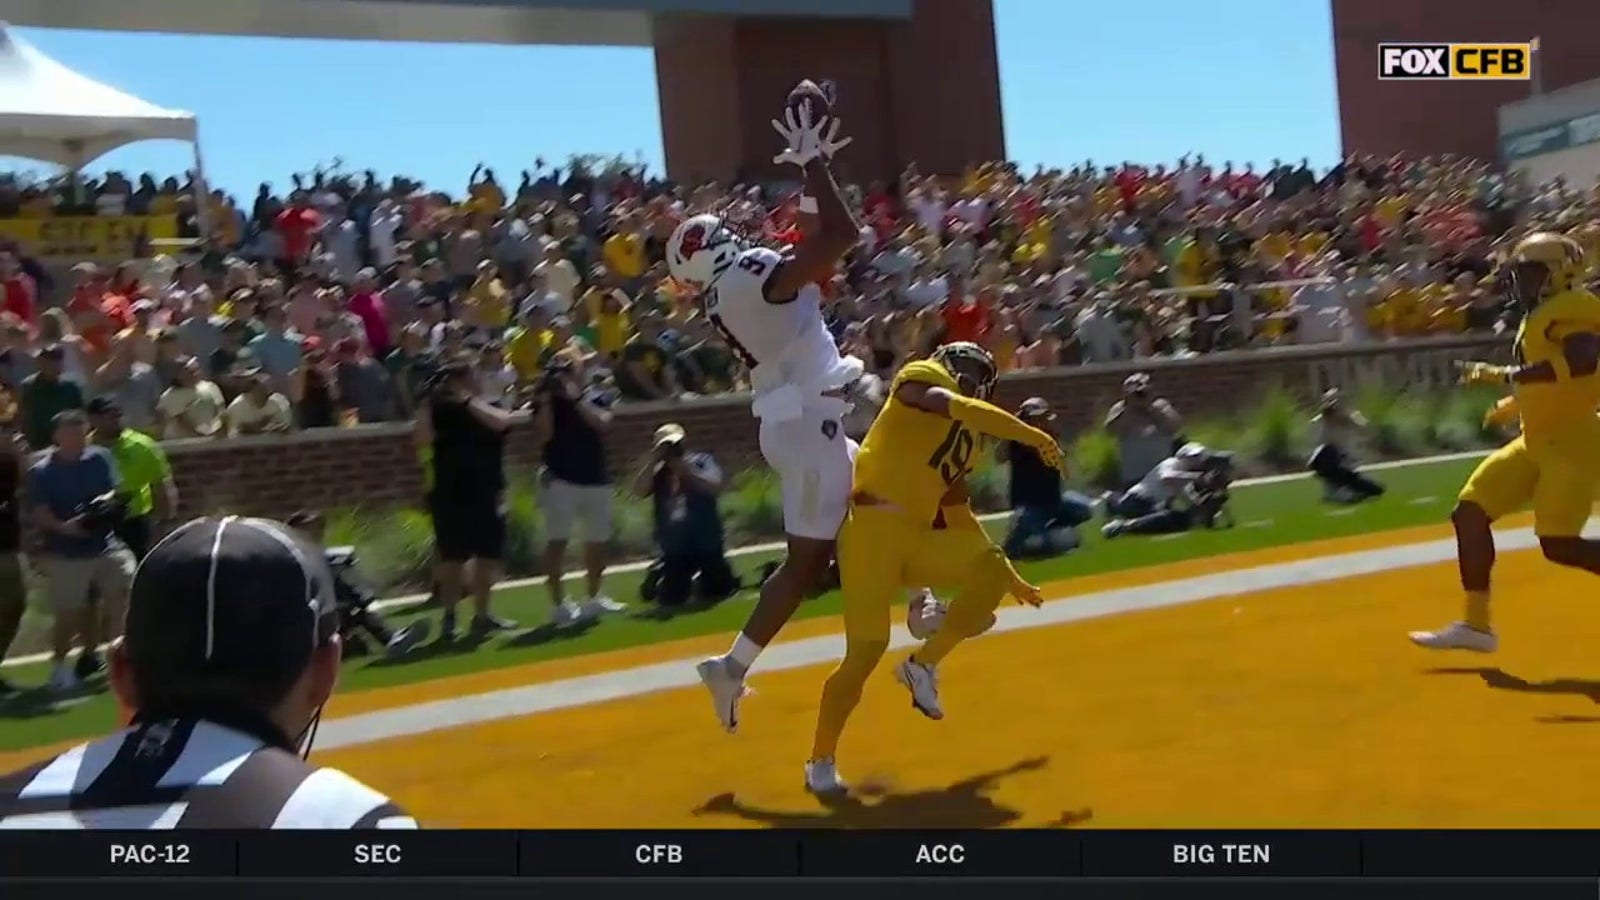 Bryson Green makes a ridiculous grab in the end zone